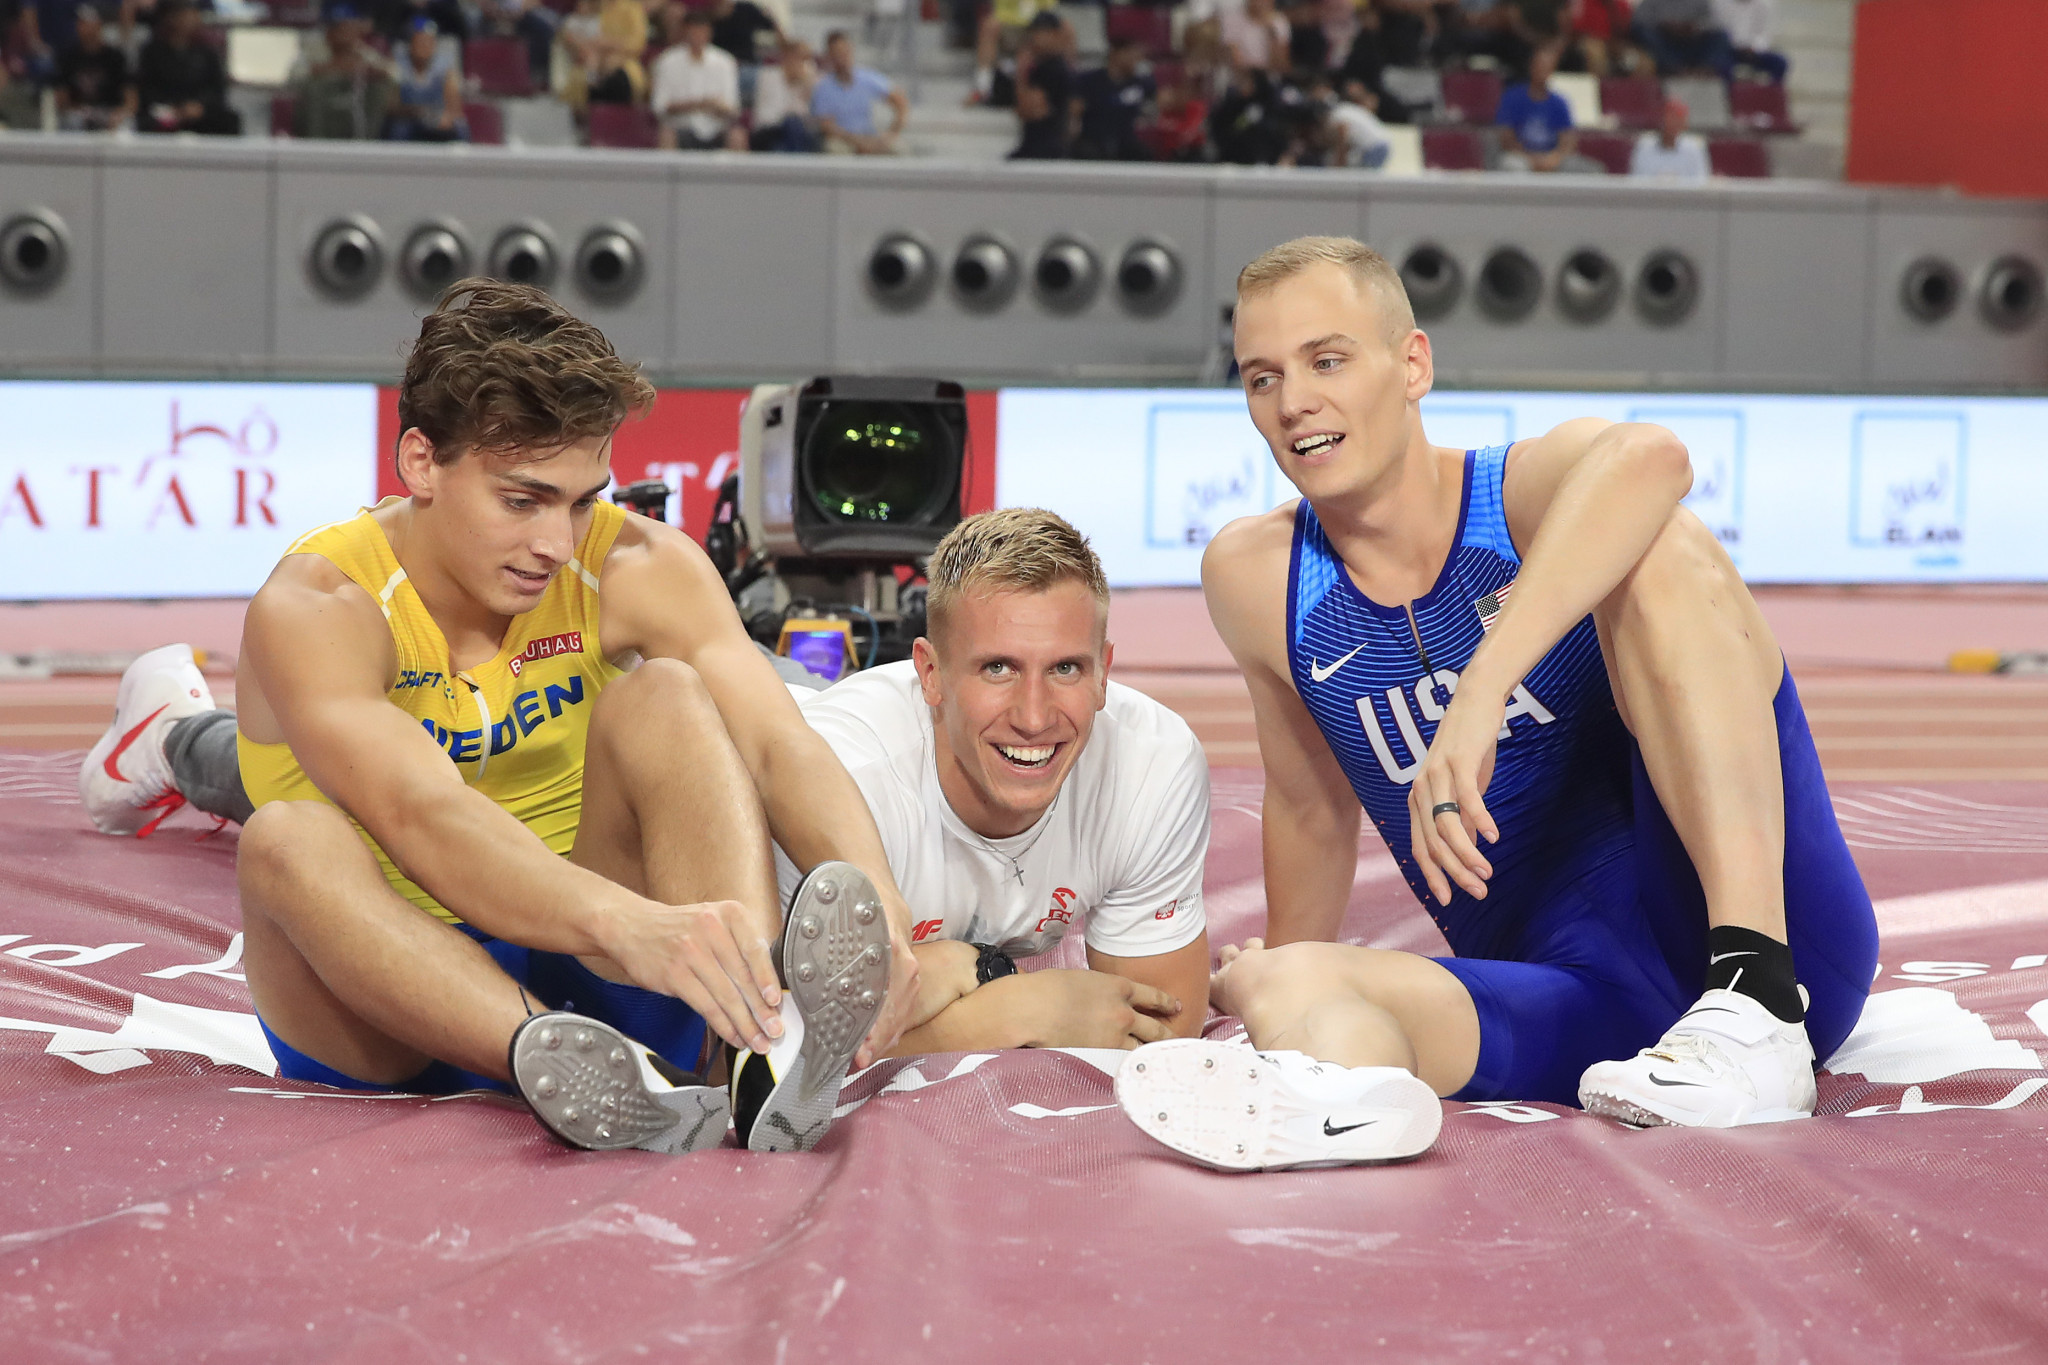 Gold medallist Sam Kendricks of the United States and the silver and bronze medallists Armand Duplantis of Sweden and Piotr Lisek of Poland celebrate after the men's pole vault ©Getty Images